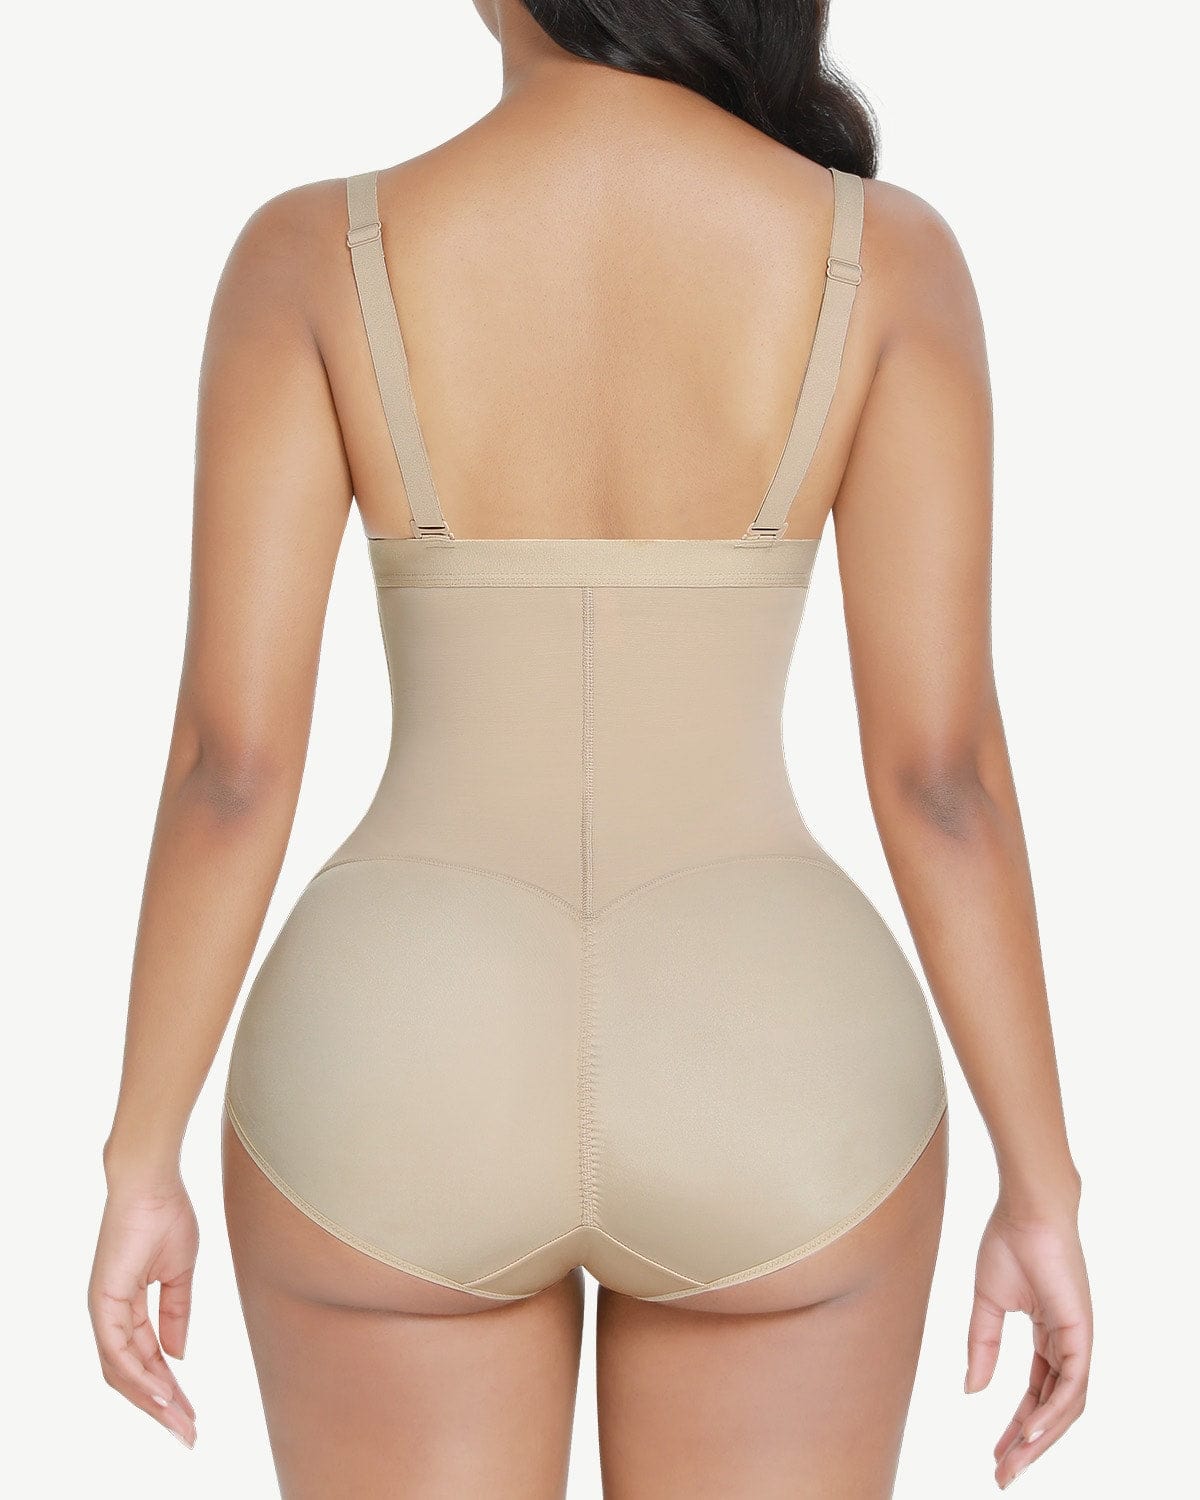 AirSlim® High Waisted Butt Lifter Shorts With 2 Steel Bones